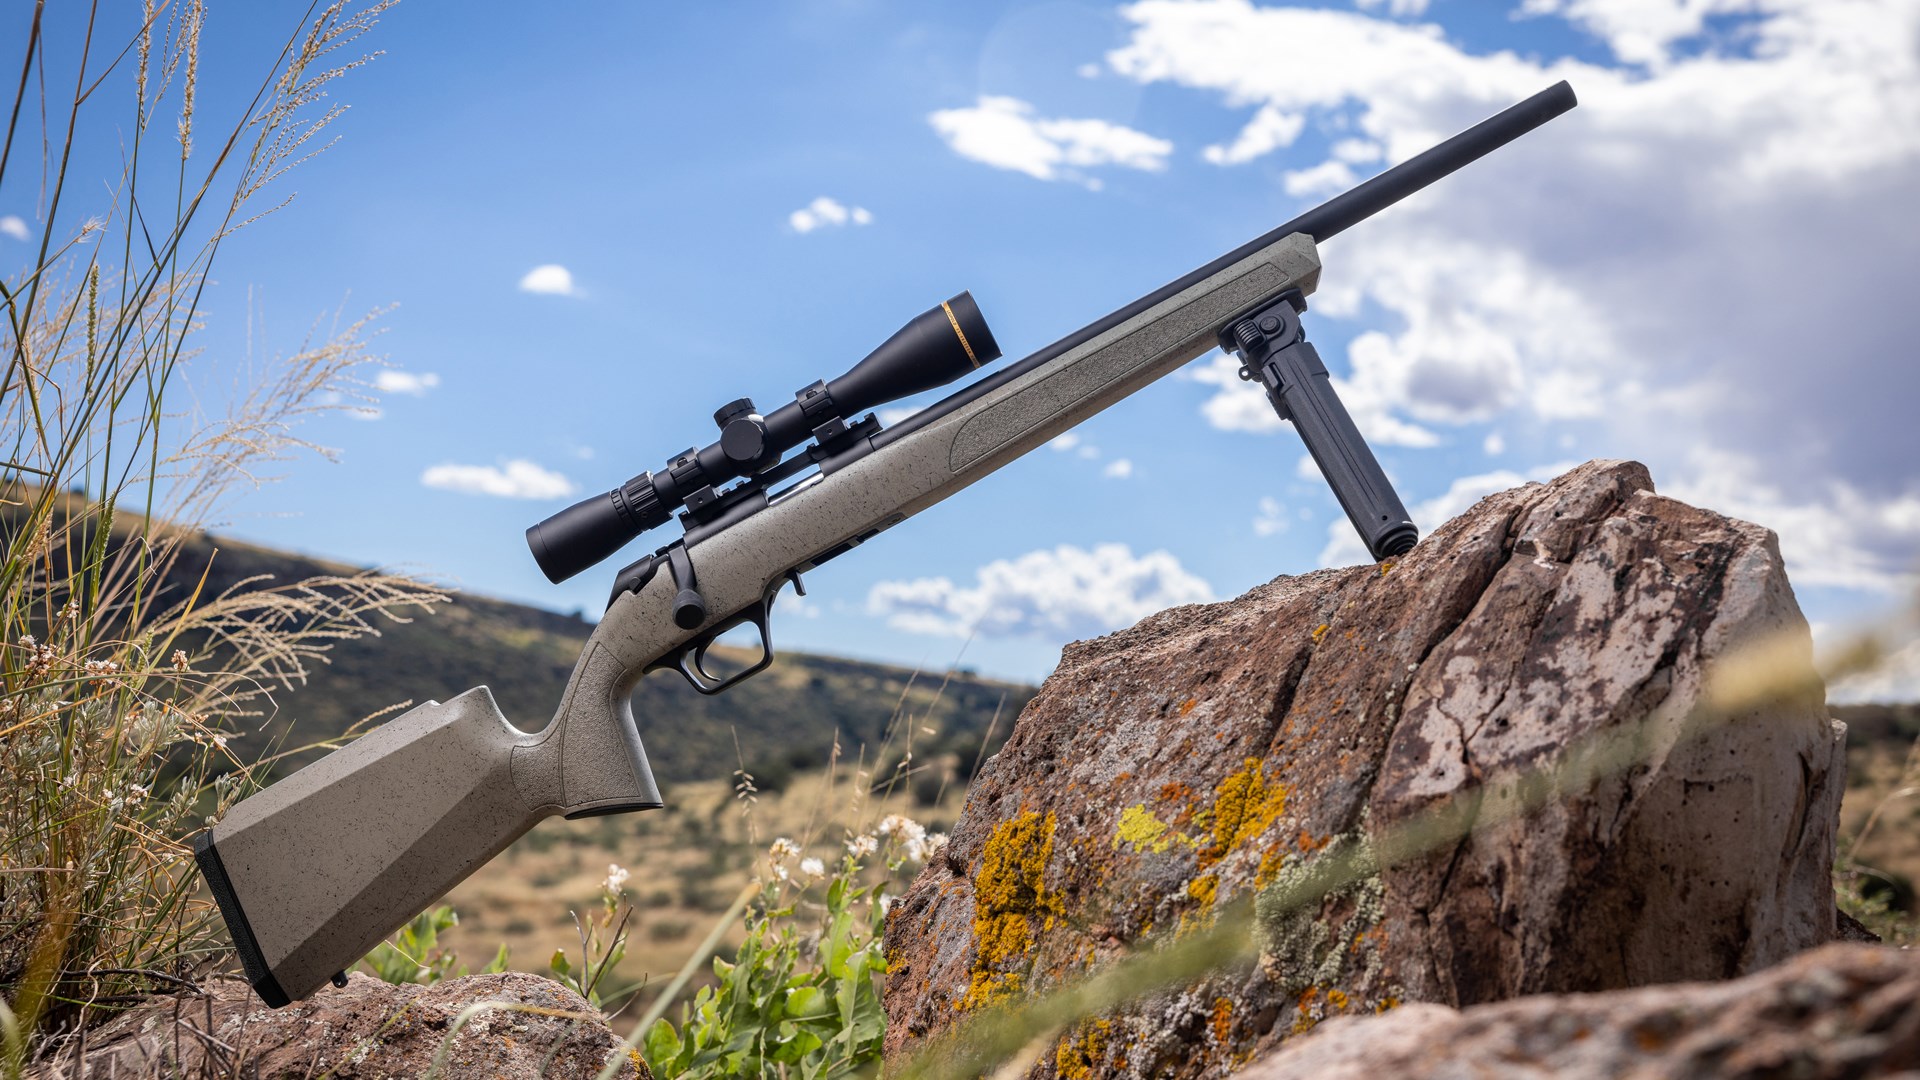 Springfield Model 2020 Rimfire Target with a Leuopld scope and a Magpul bipod propped up on a rock.